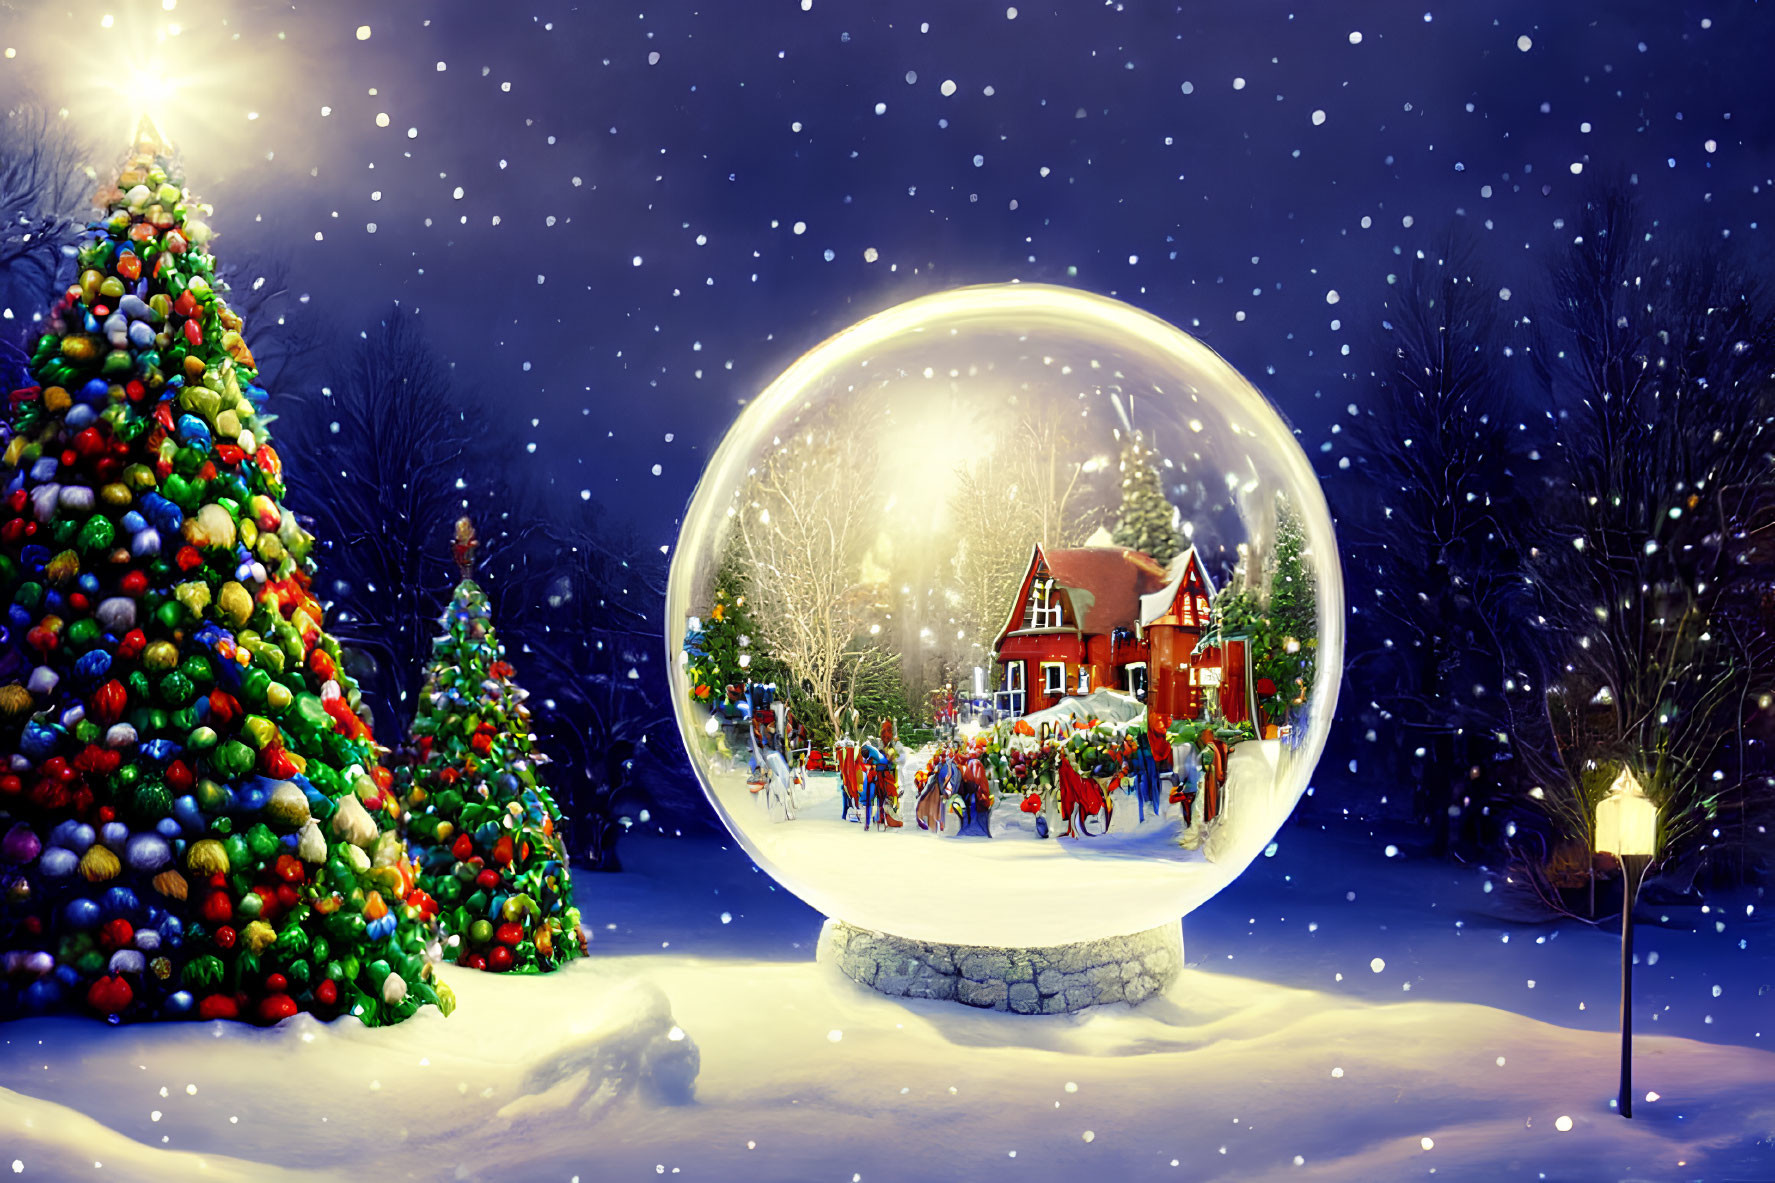 Festive snow globe scene with Christmas village and falling snow